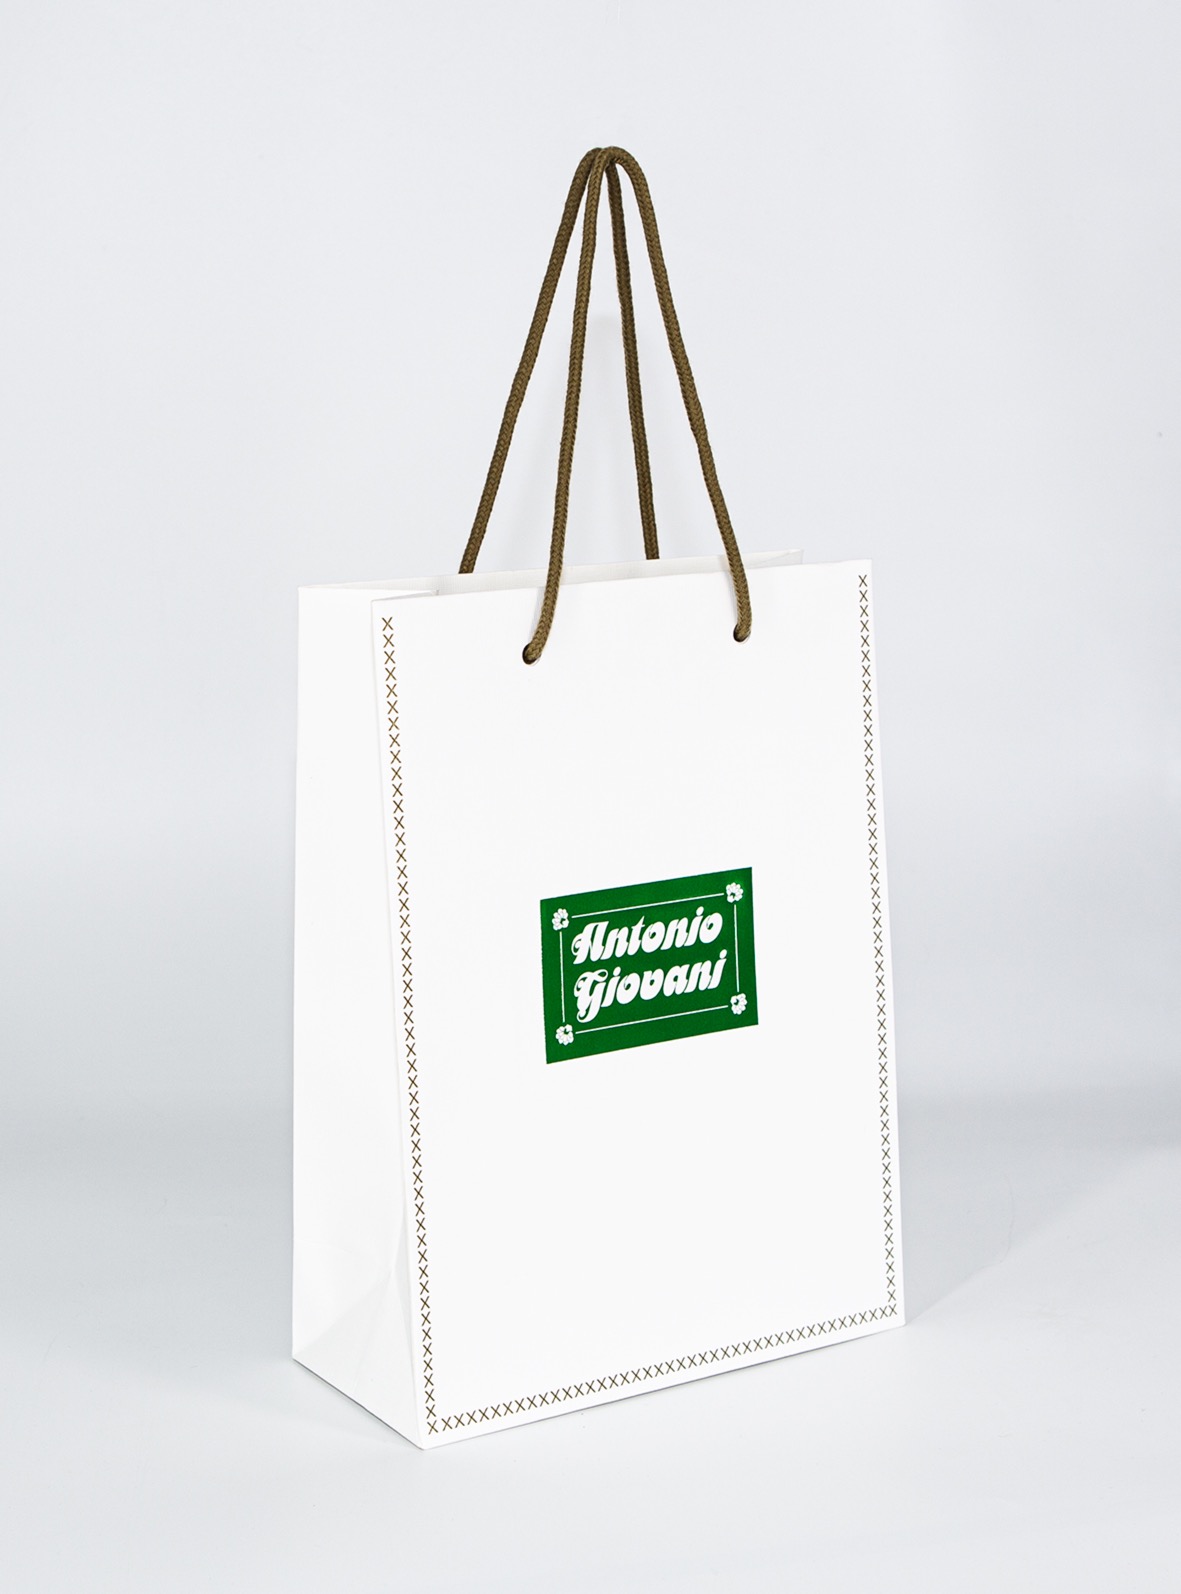 Manufacture & Exporter of 🛍️ Shopping Bags 👜 Promotion Bags 🧳 Designer  Bags ∆ Specialist of Box Type Non Woven Bags.. ∆ Customize as per…